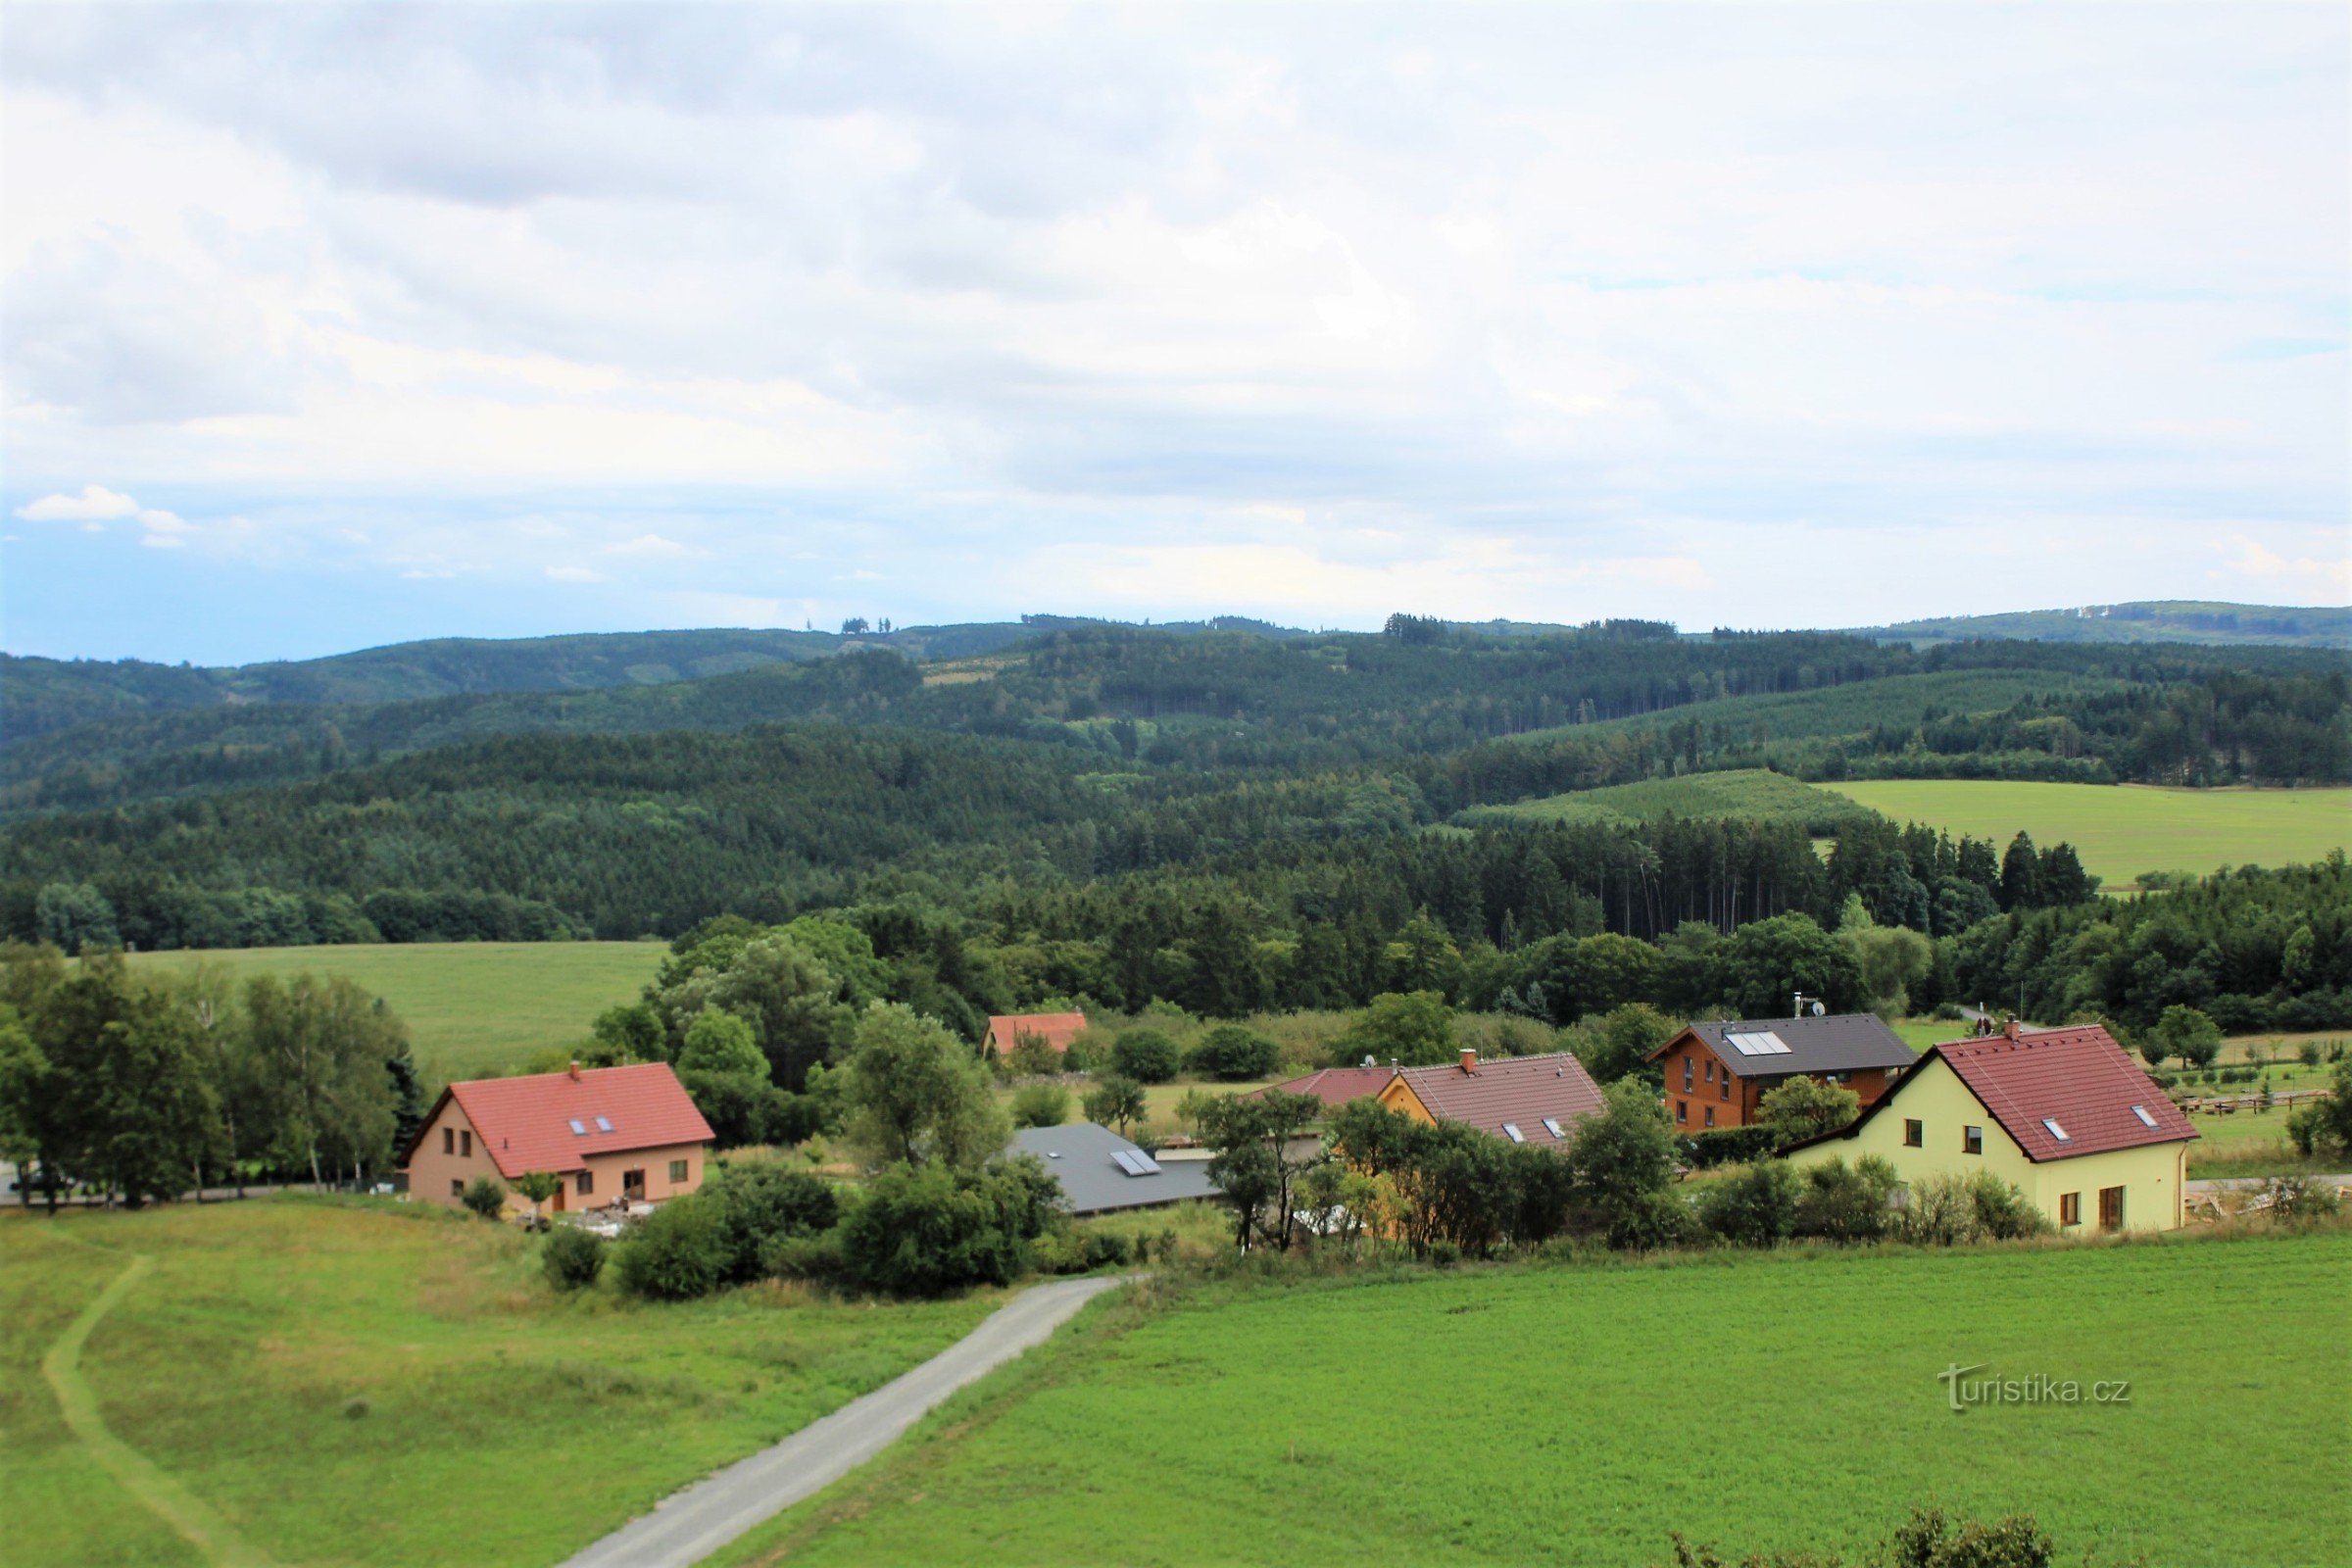 View from the observation tower over the upper part of the village towards the Hořický hřbet